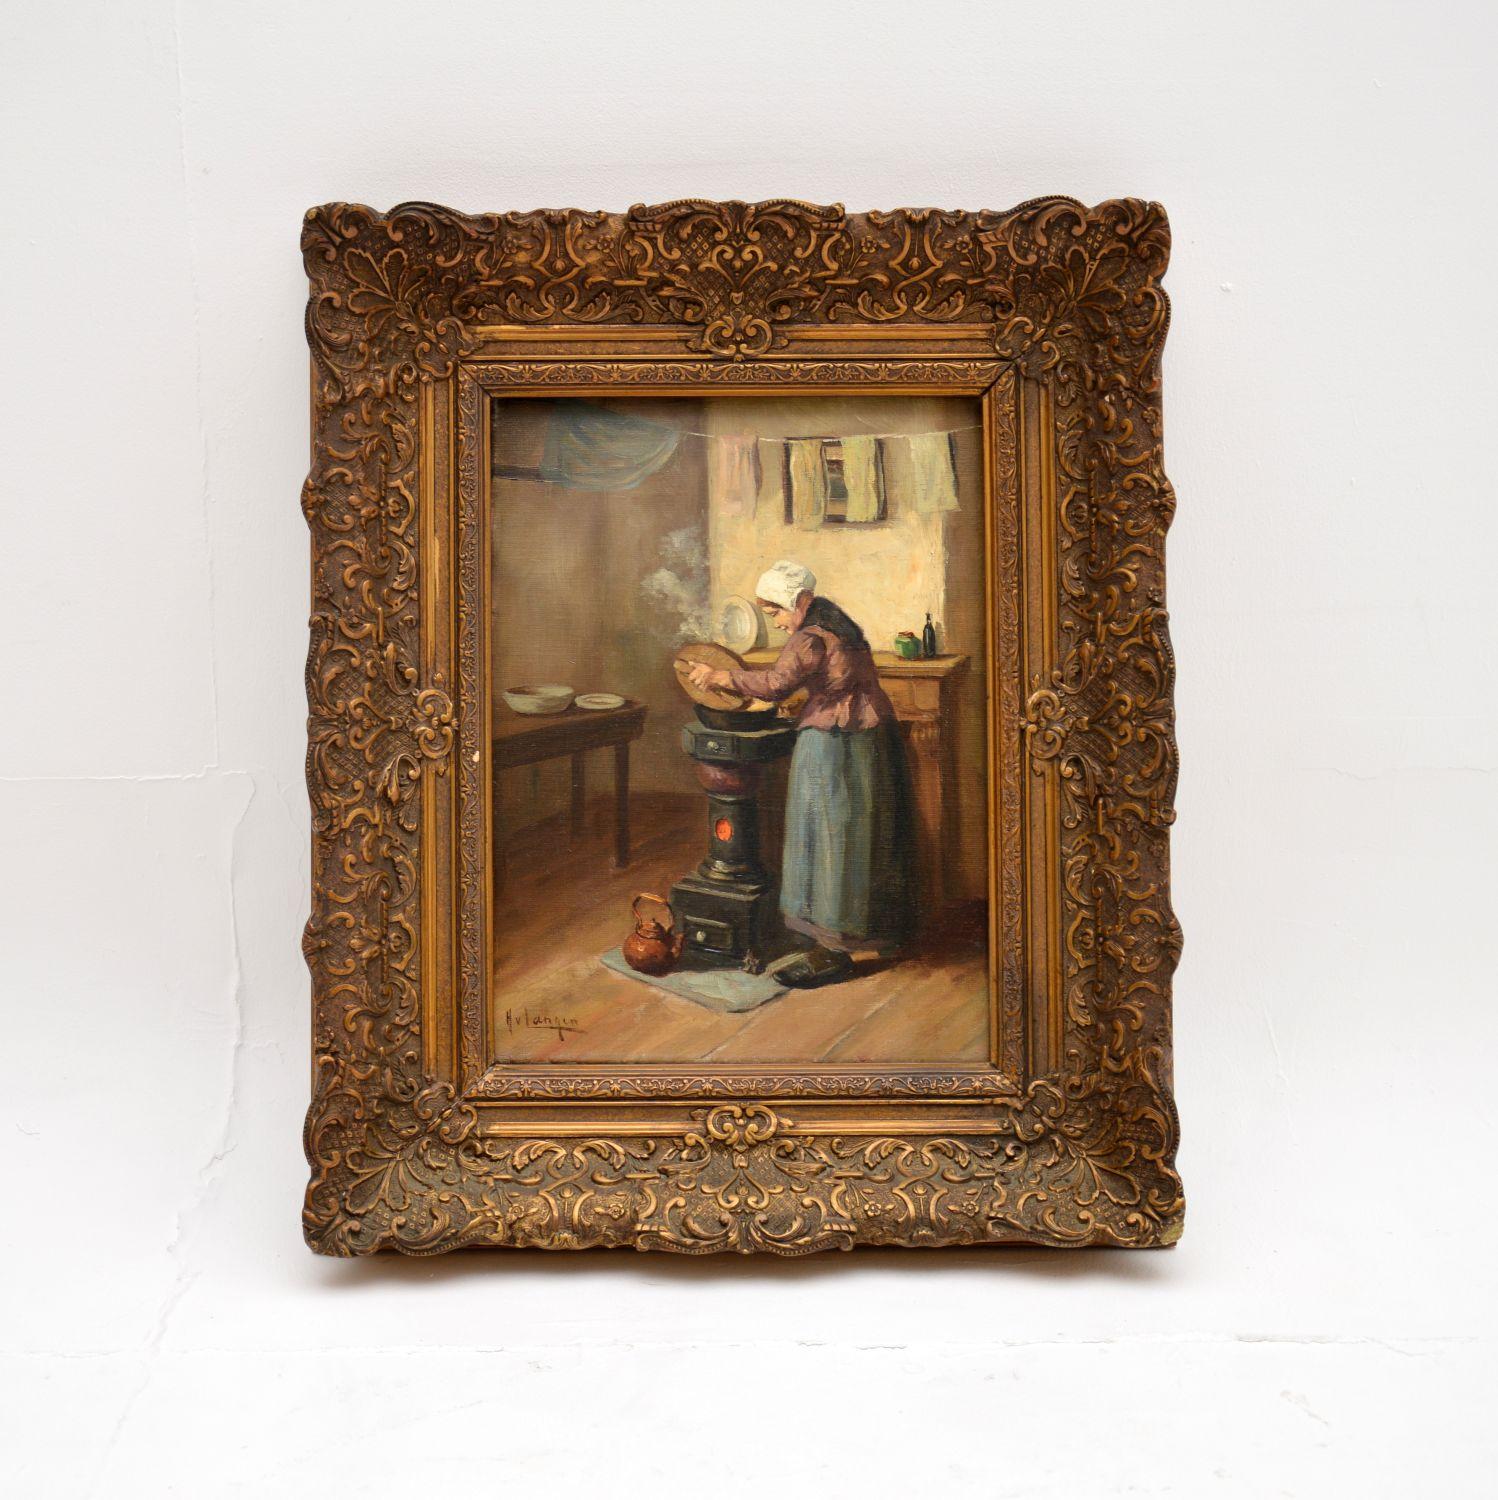 A beautiful antique oil painting by the well known Dutch artist Hendrikus Johannes Franciscus van Langen. This dates from the early twentieth century around 1900-1920.

It depicts a peasant woman cooking, it is beautifully executed and mounted in a